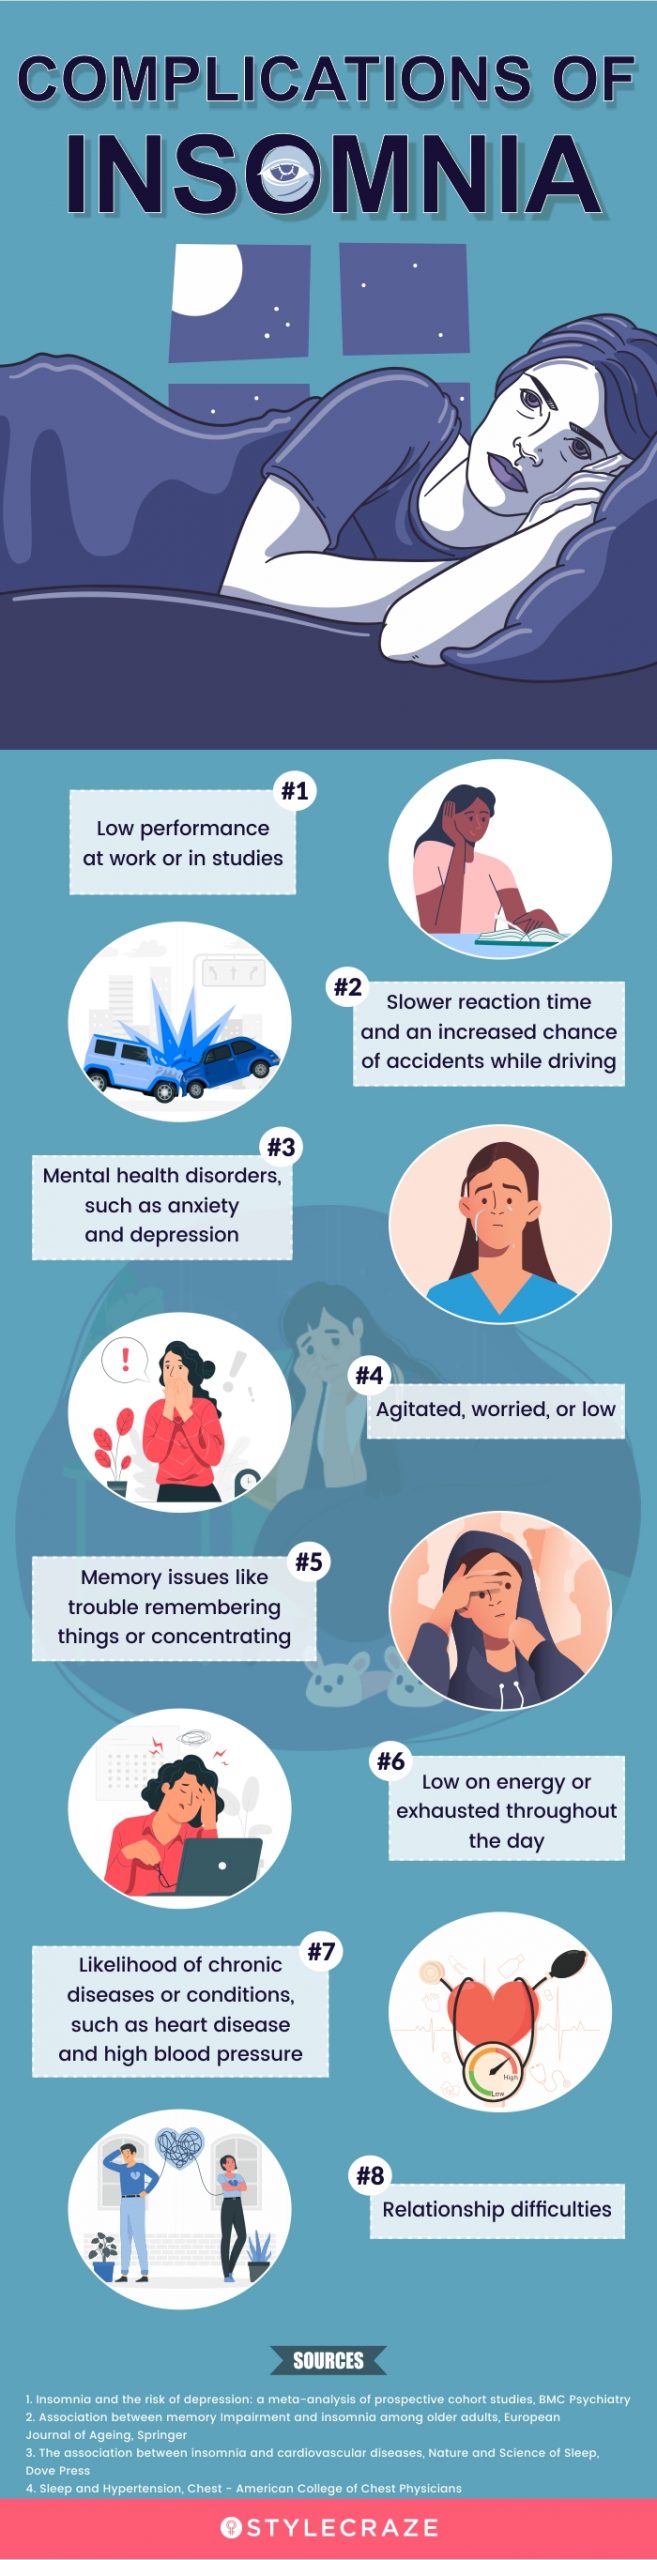 complications of insomnia [infographic]